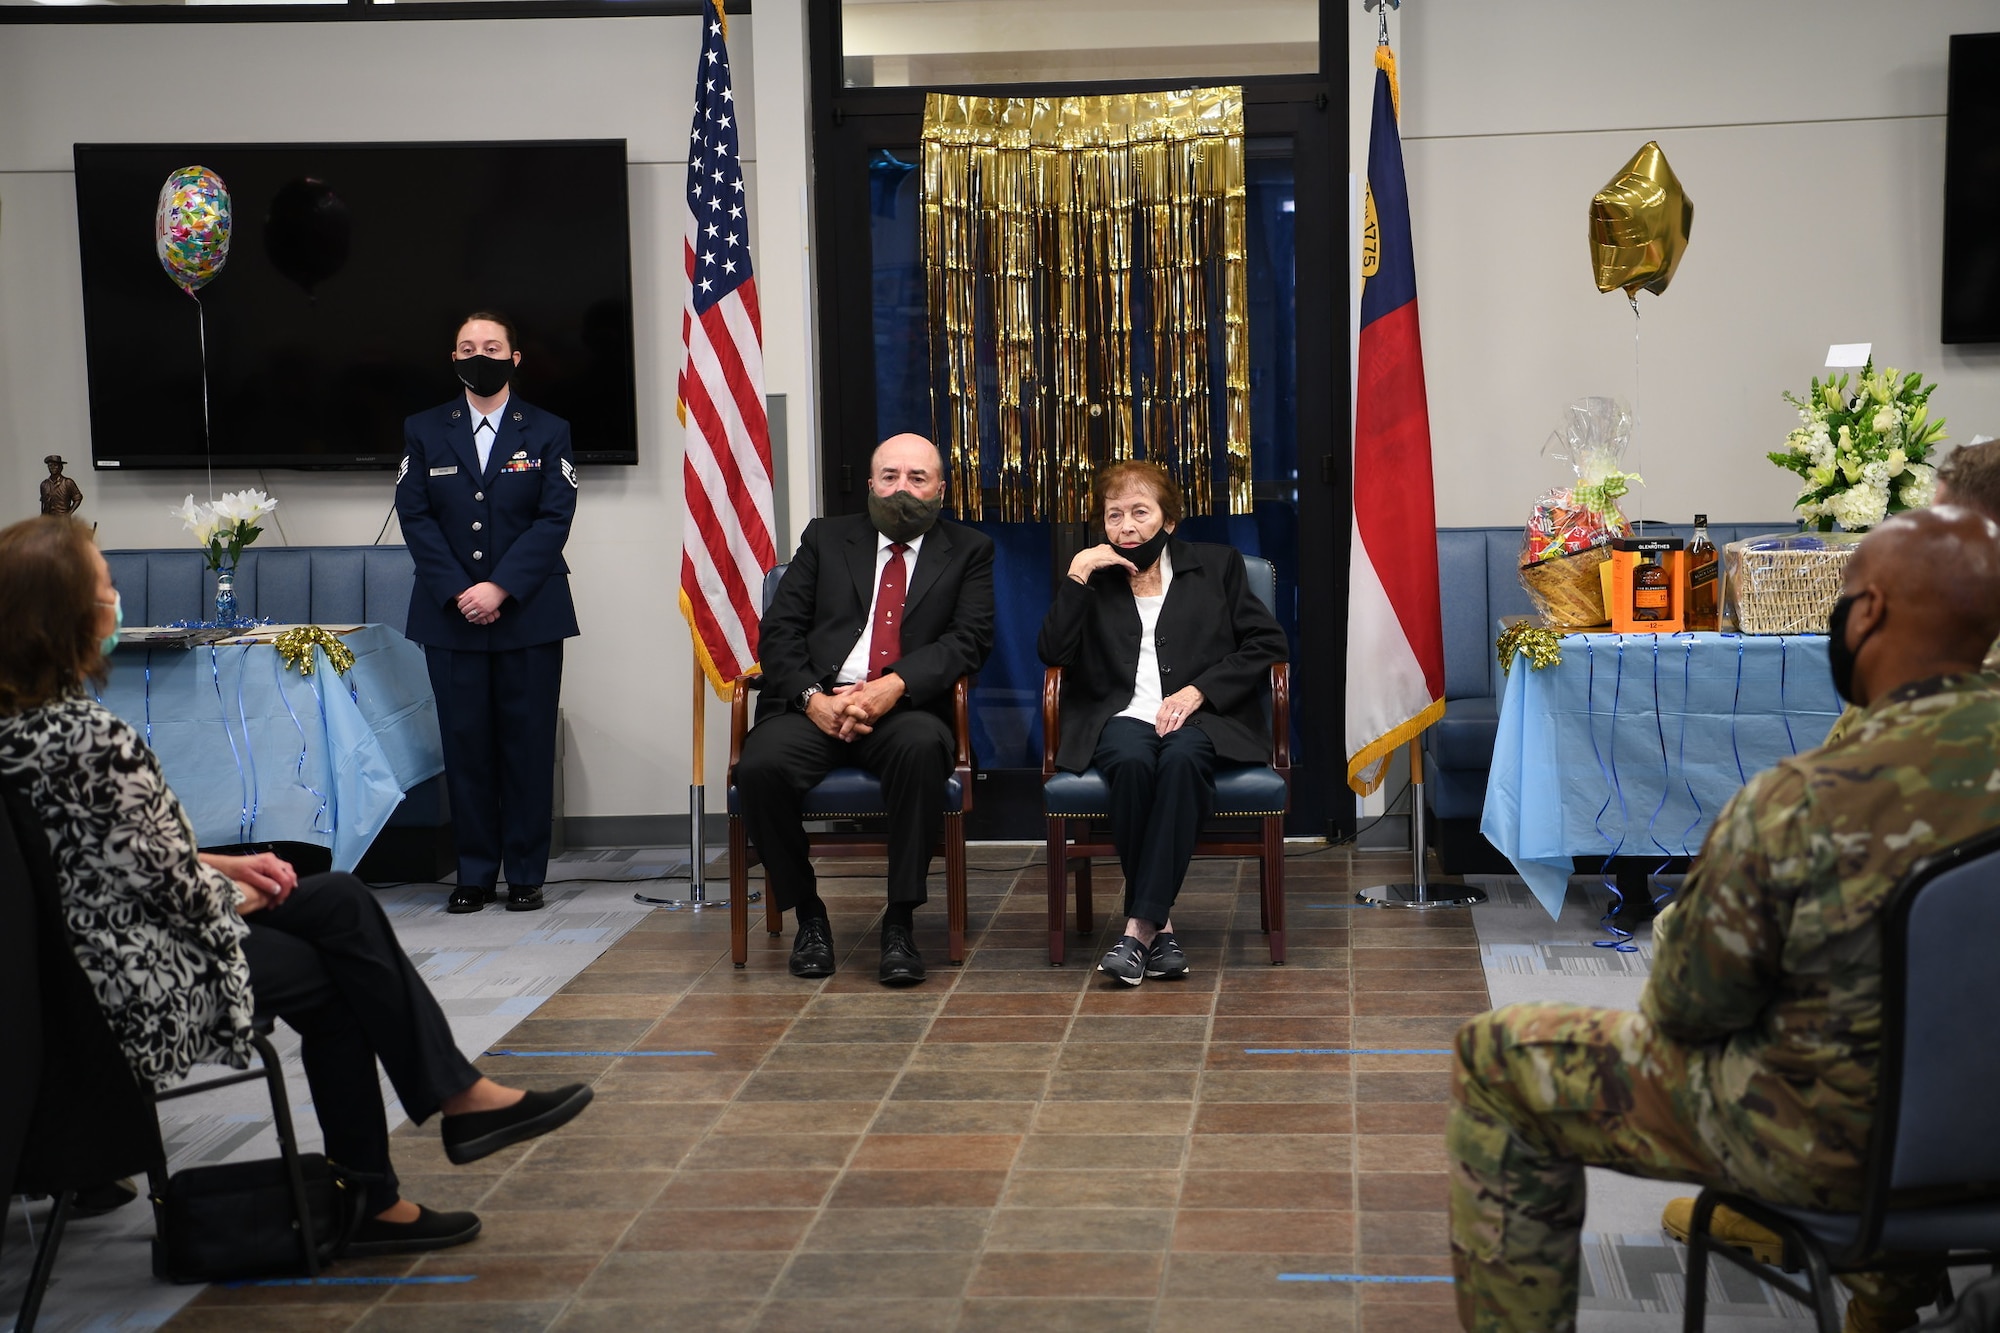 Mrs. Jere Firth (right) sits before an audience of retired and active military members for her retirement celebration after over 59 years of service as a civilian technician employee, at the NCANG Base, Charlotte Douglas International Airport, Nov. 19, 2021. Mrs. Firth has worked specifically for the North Carolina Air National Guard since 1972 and retires as one of the longest employed civilians in the Department of Defense.